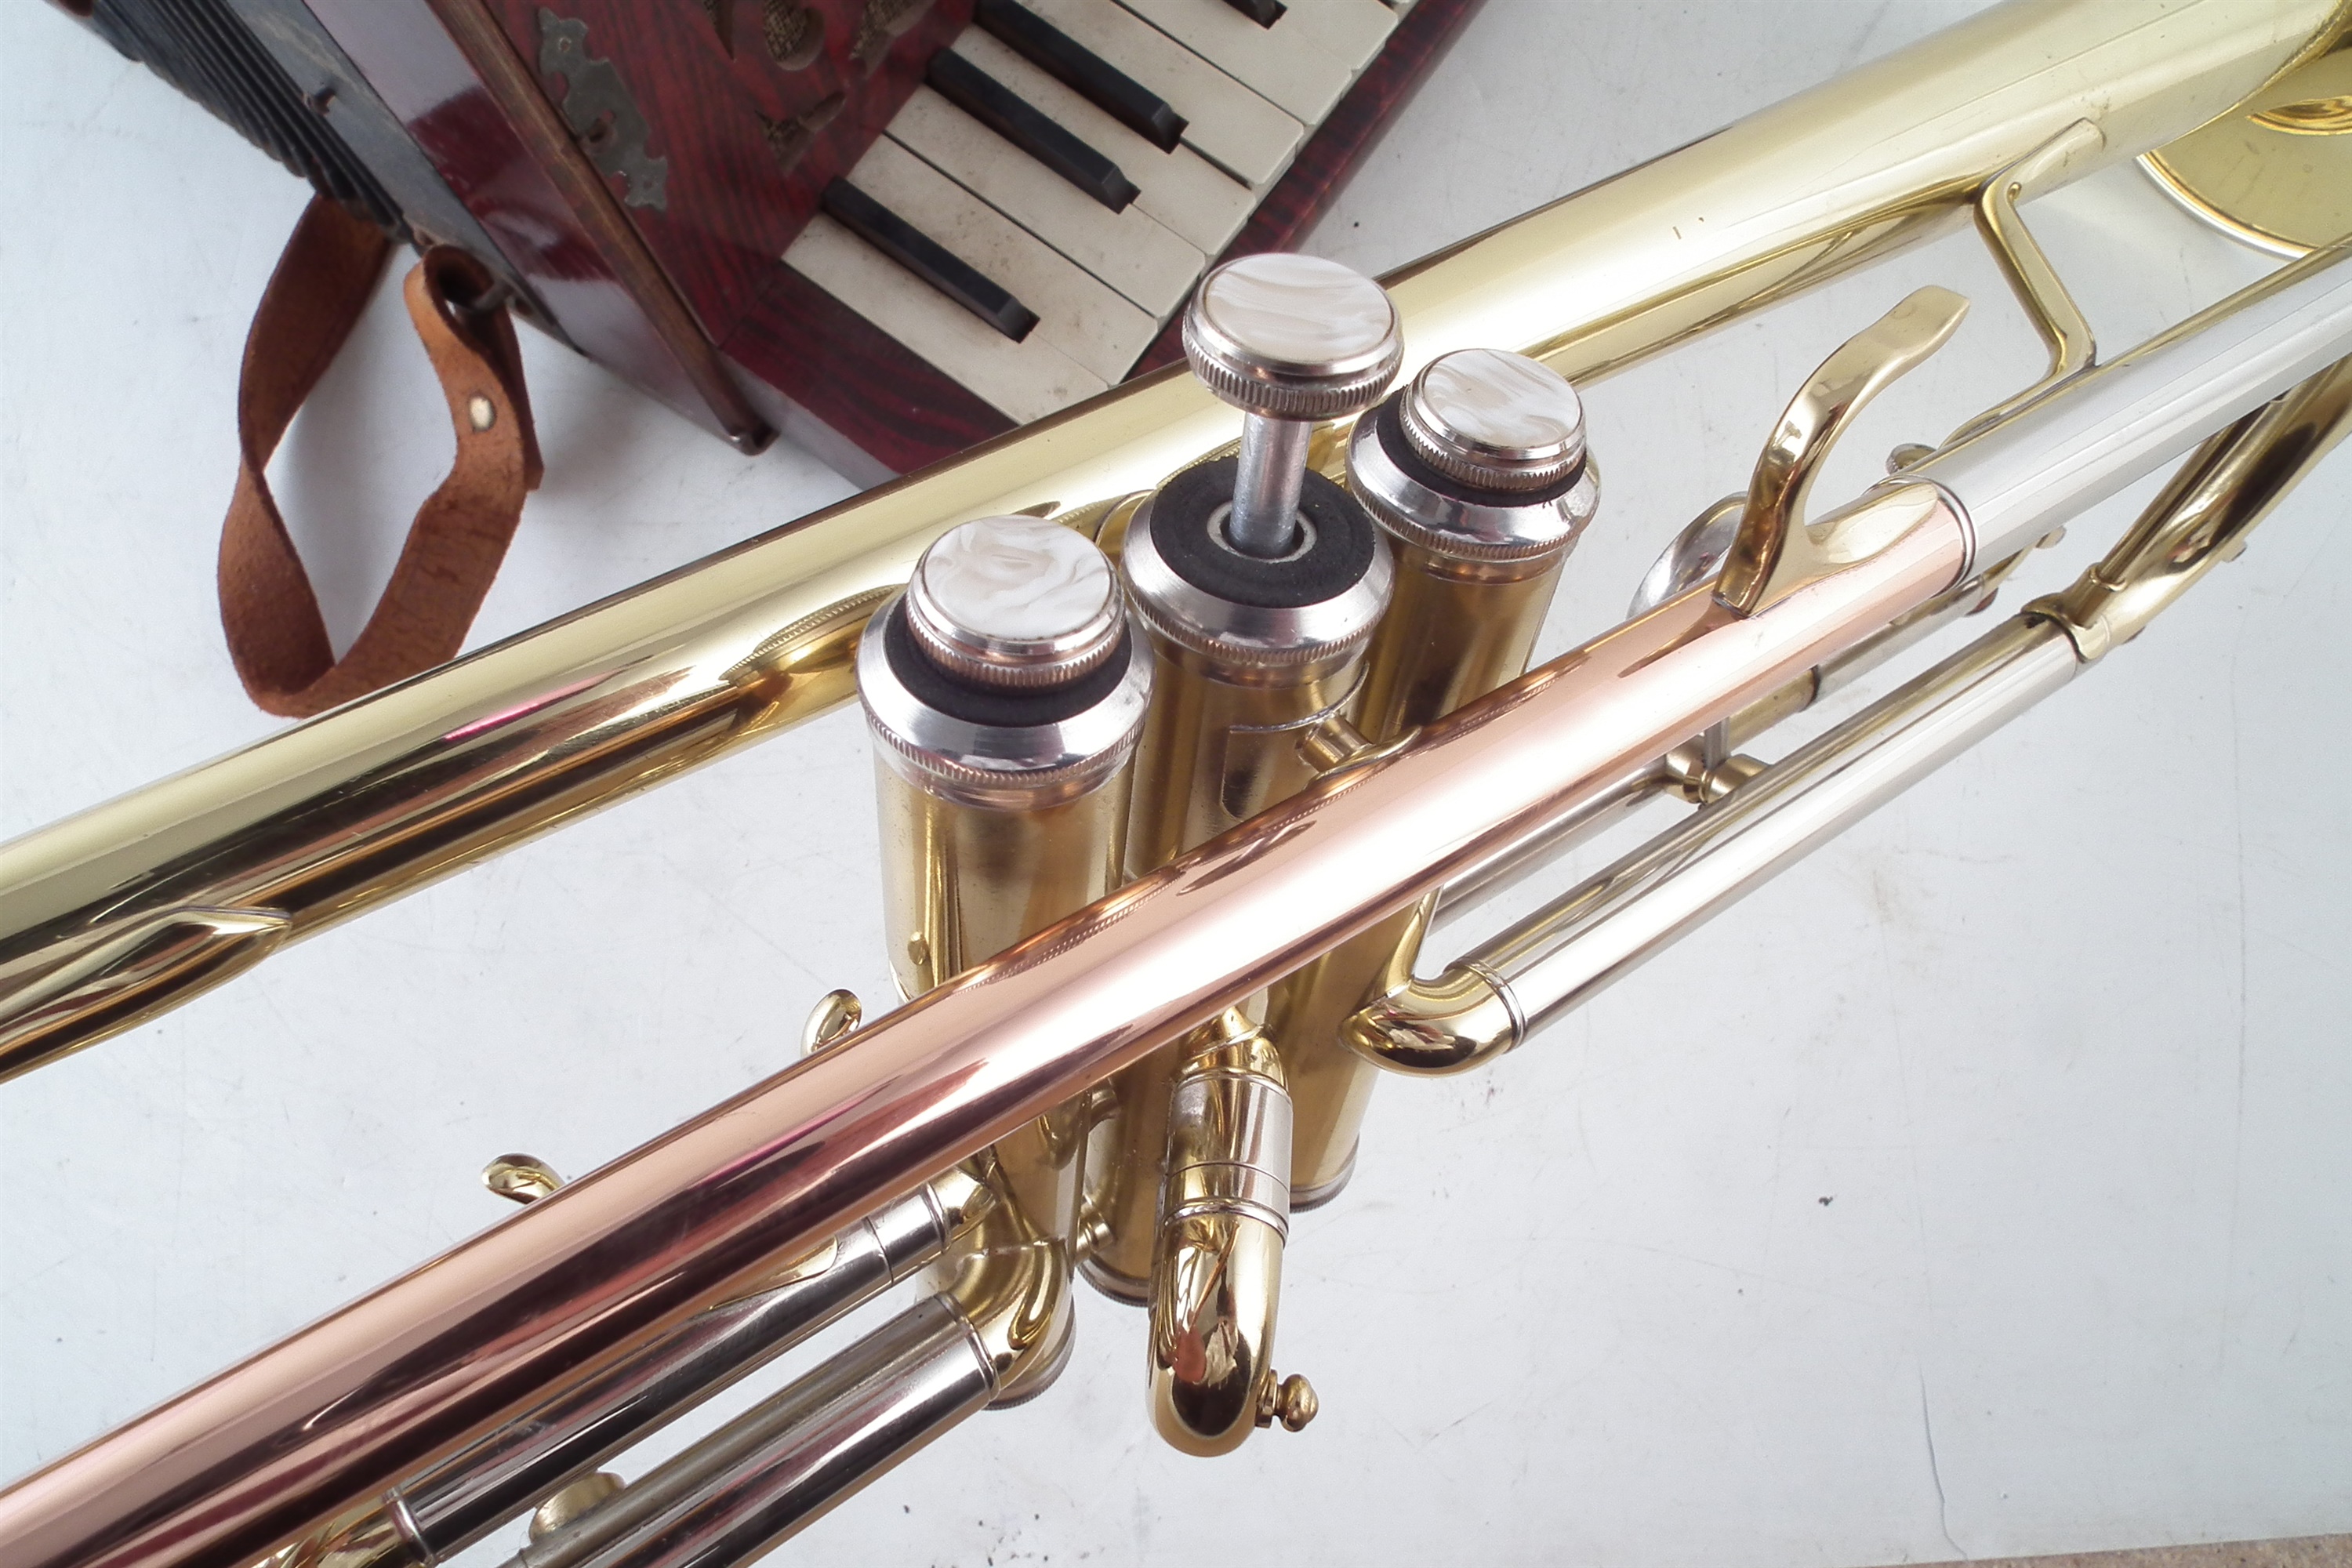 Odyssey trumpet in case and Rosetti piano accordion. - Image 3 of 6